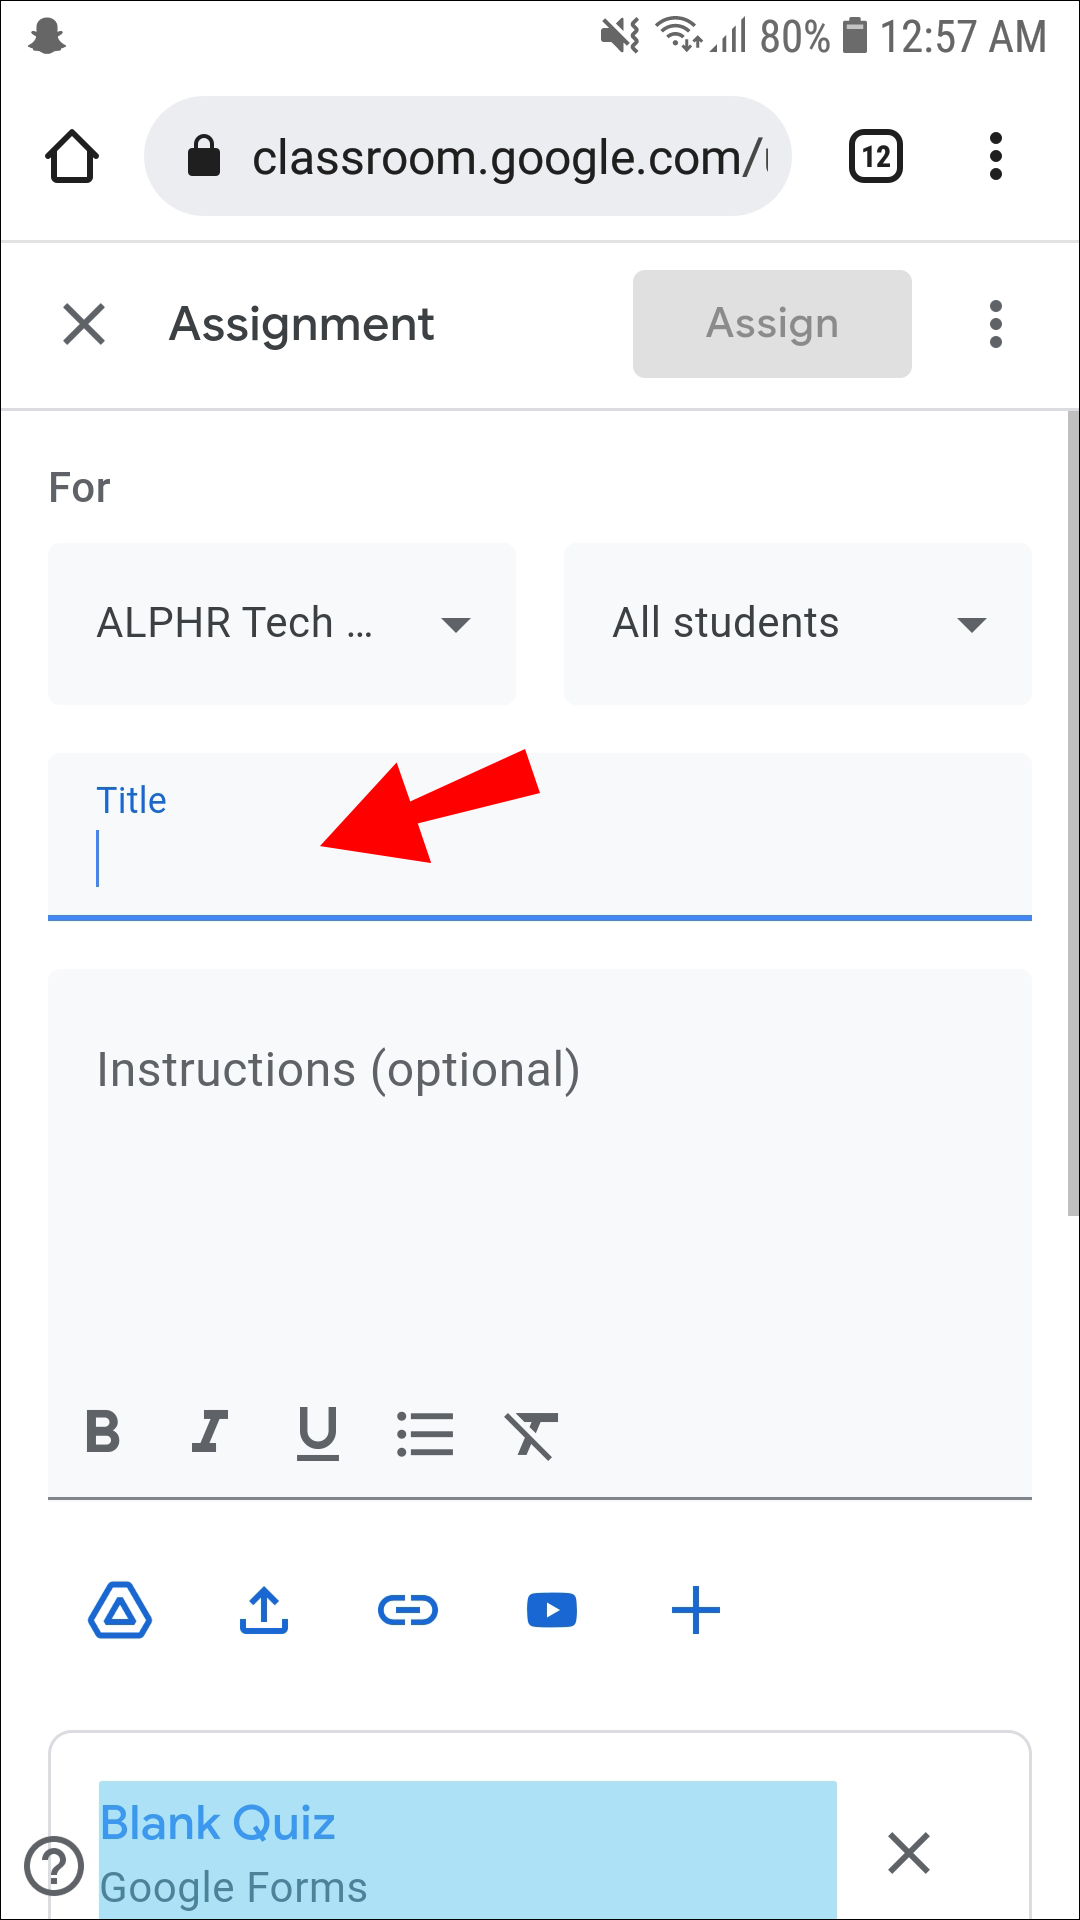 How to Create a Google Classroom on Desktop or Mobile